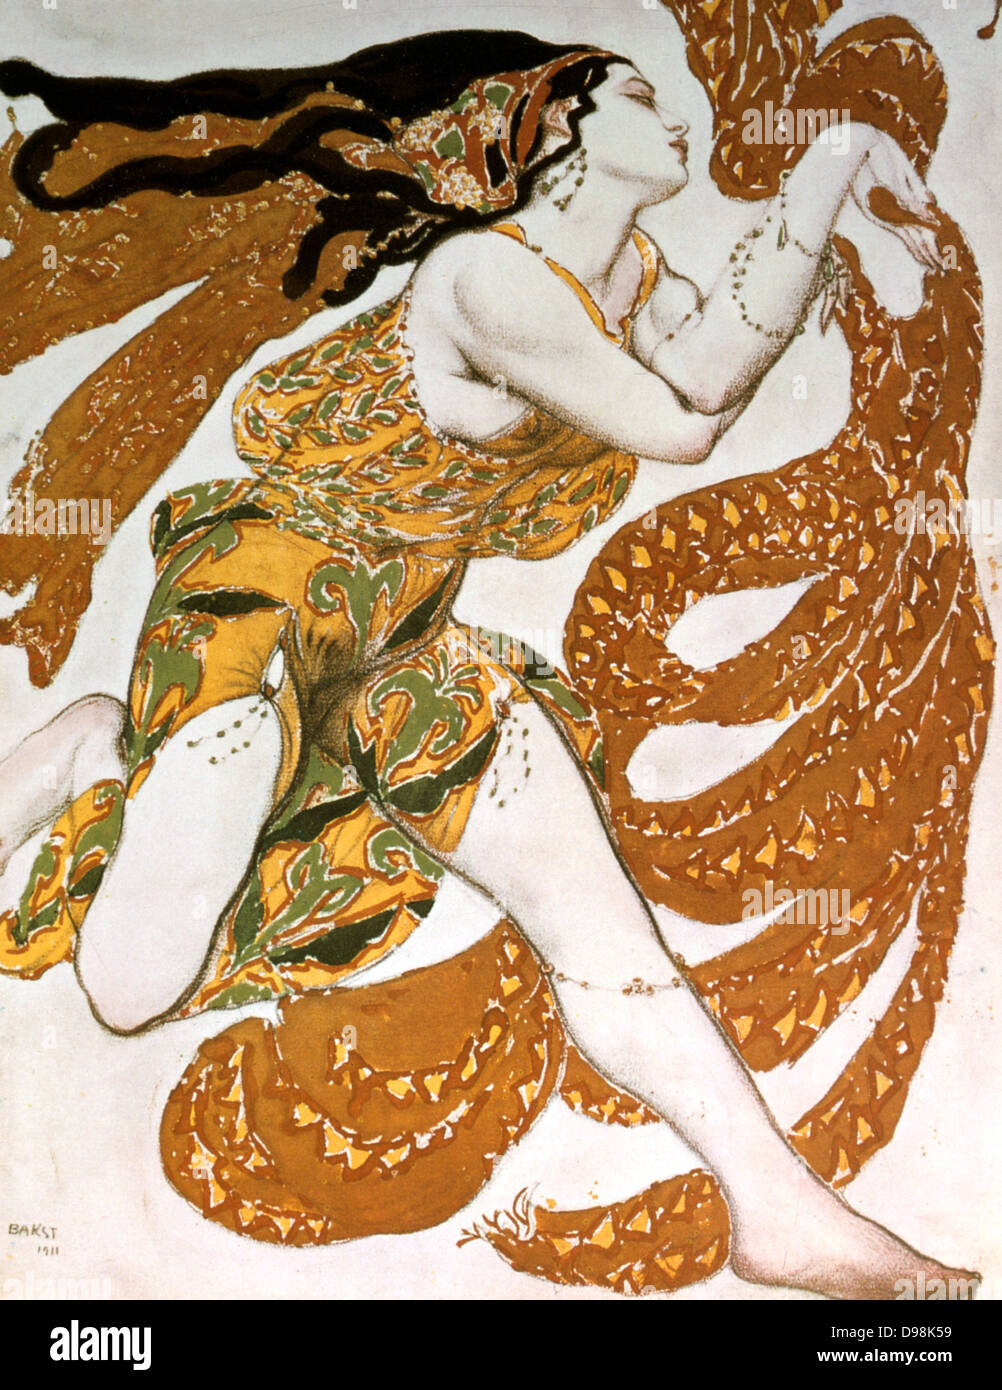 Costume design by Leon Bakst (1866-1924) for a Bacchante in 'Narcisse' produced in 1911 by Sergei Diaghilev's Ballets Russes. Music by Nikolai Tcherepnin. Stock Photo